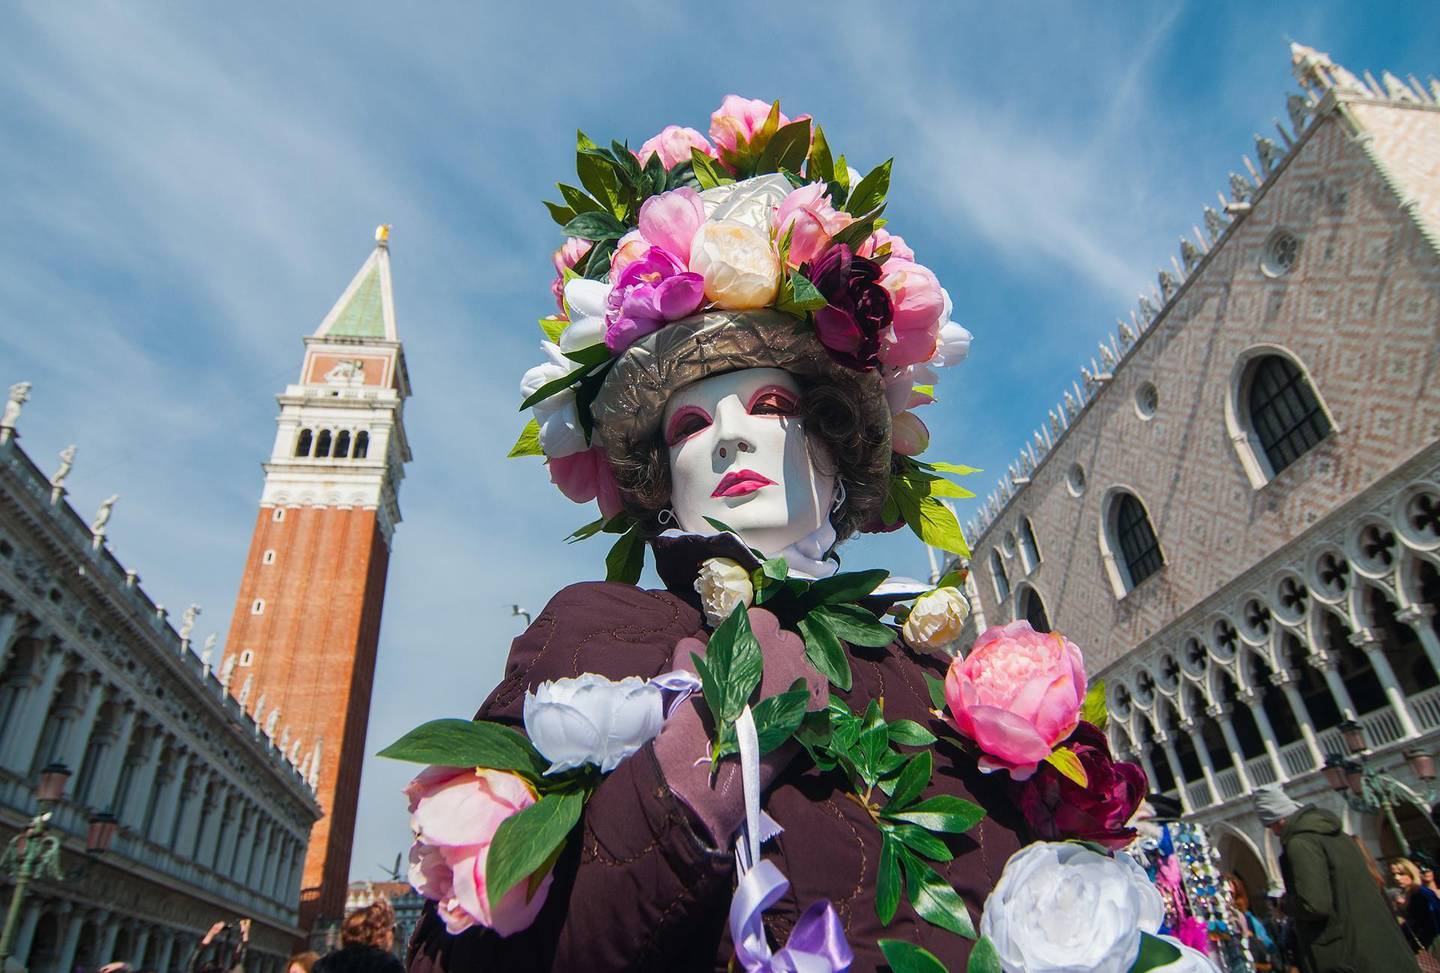 VENICE, ITALY - FEBRUARY 26:  A girl wearing carnival costumes poses during the 'Volo dell'Aquila' at Piazza San Marco on February 26, 2017 in Venice, Italy. The 2017 Venice Carnival runs from 11 to 28 February and includes a program of gala dinners, parades, dances, masked balls and music events.  (Photo by Awakening/Getty Images)